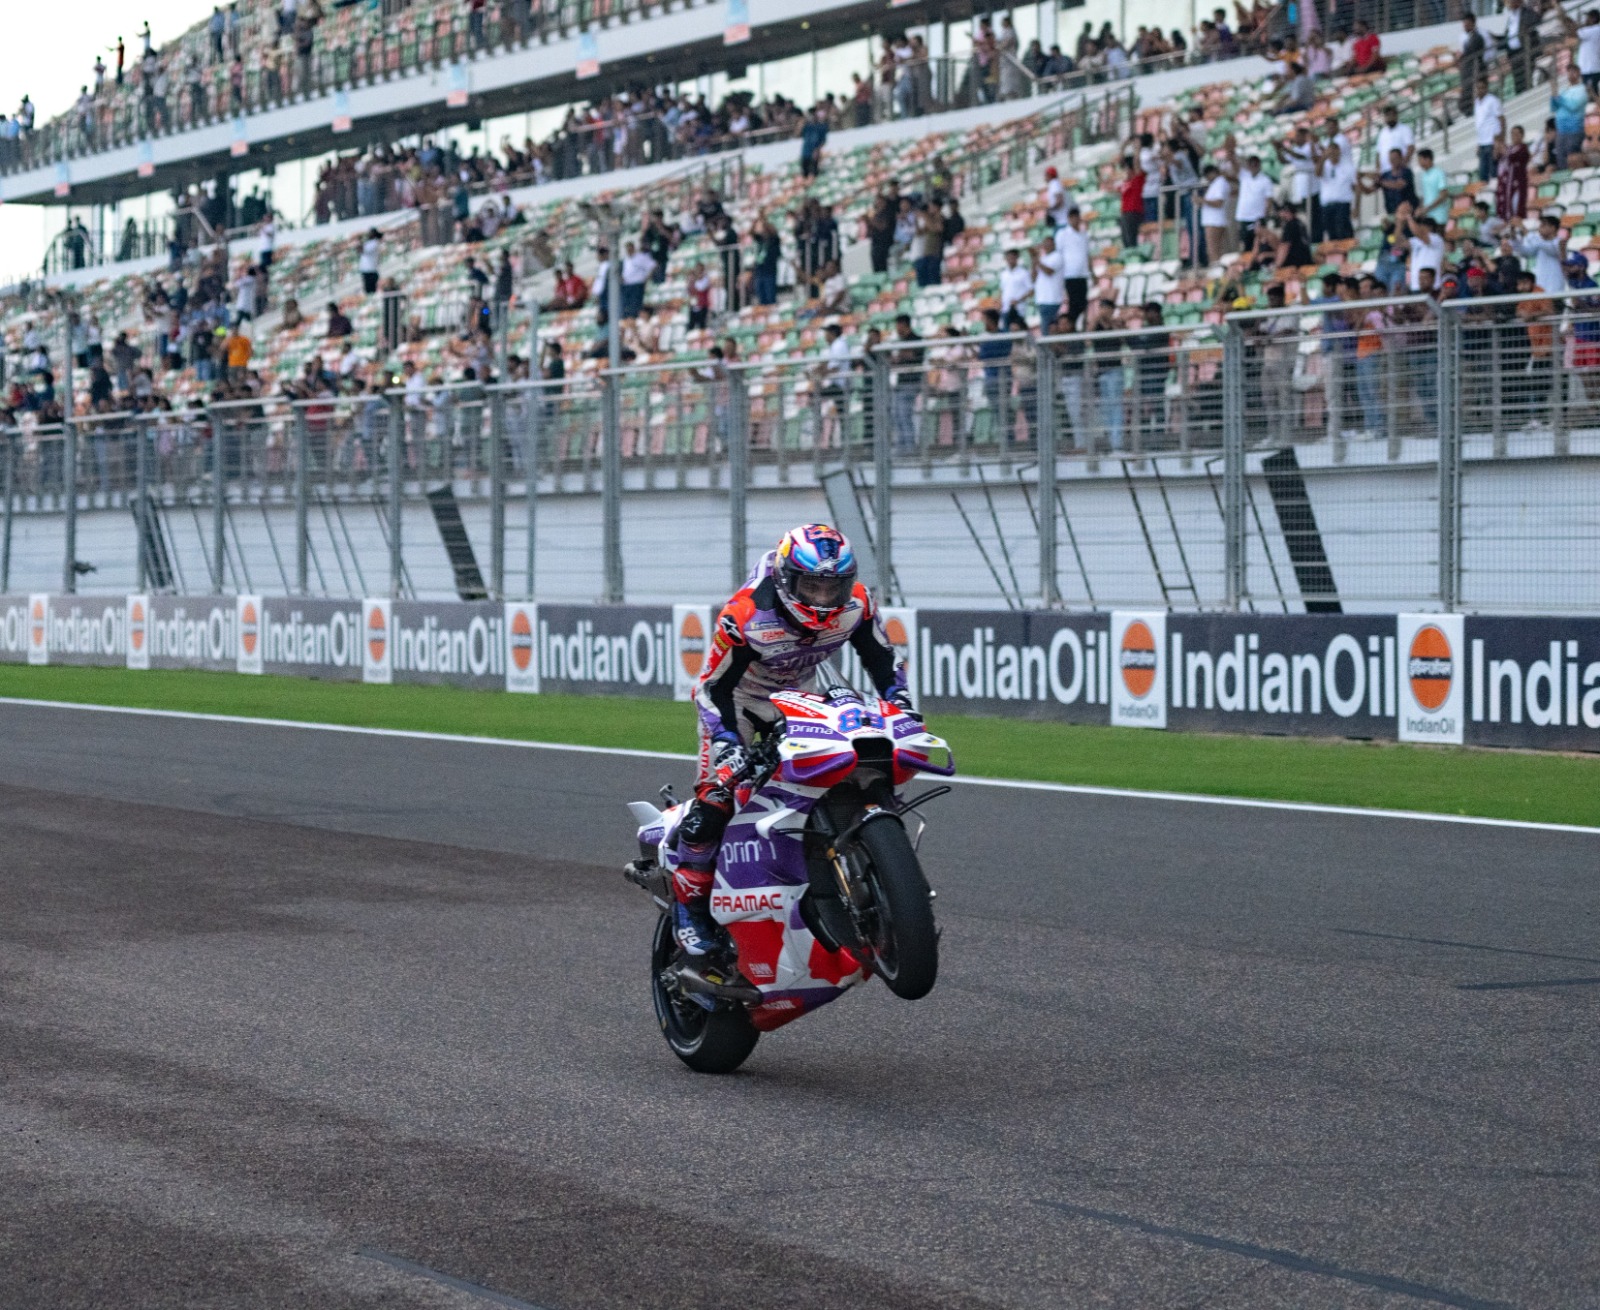 MotoGP event held in Greater Noida saw one lakh visitors, business worth 933 crore